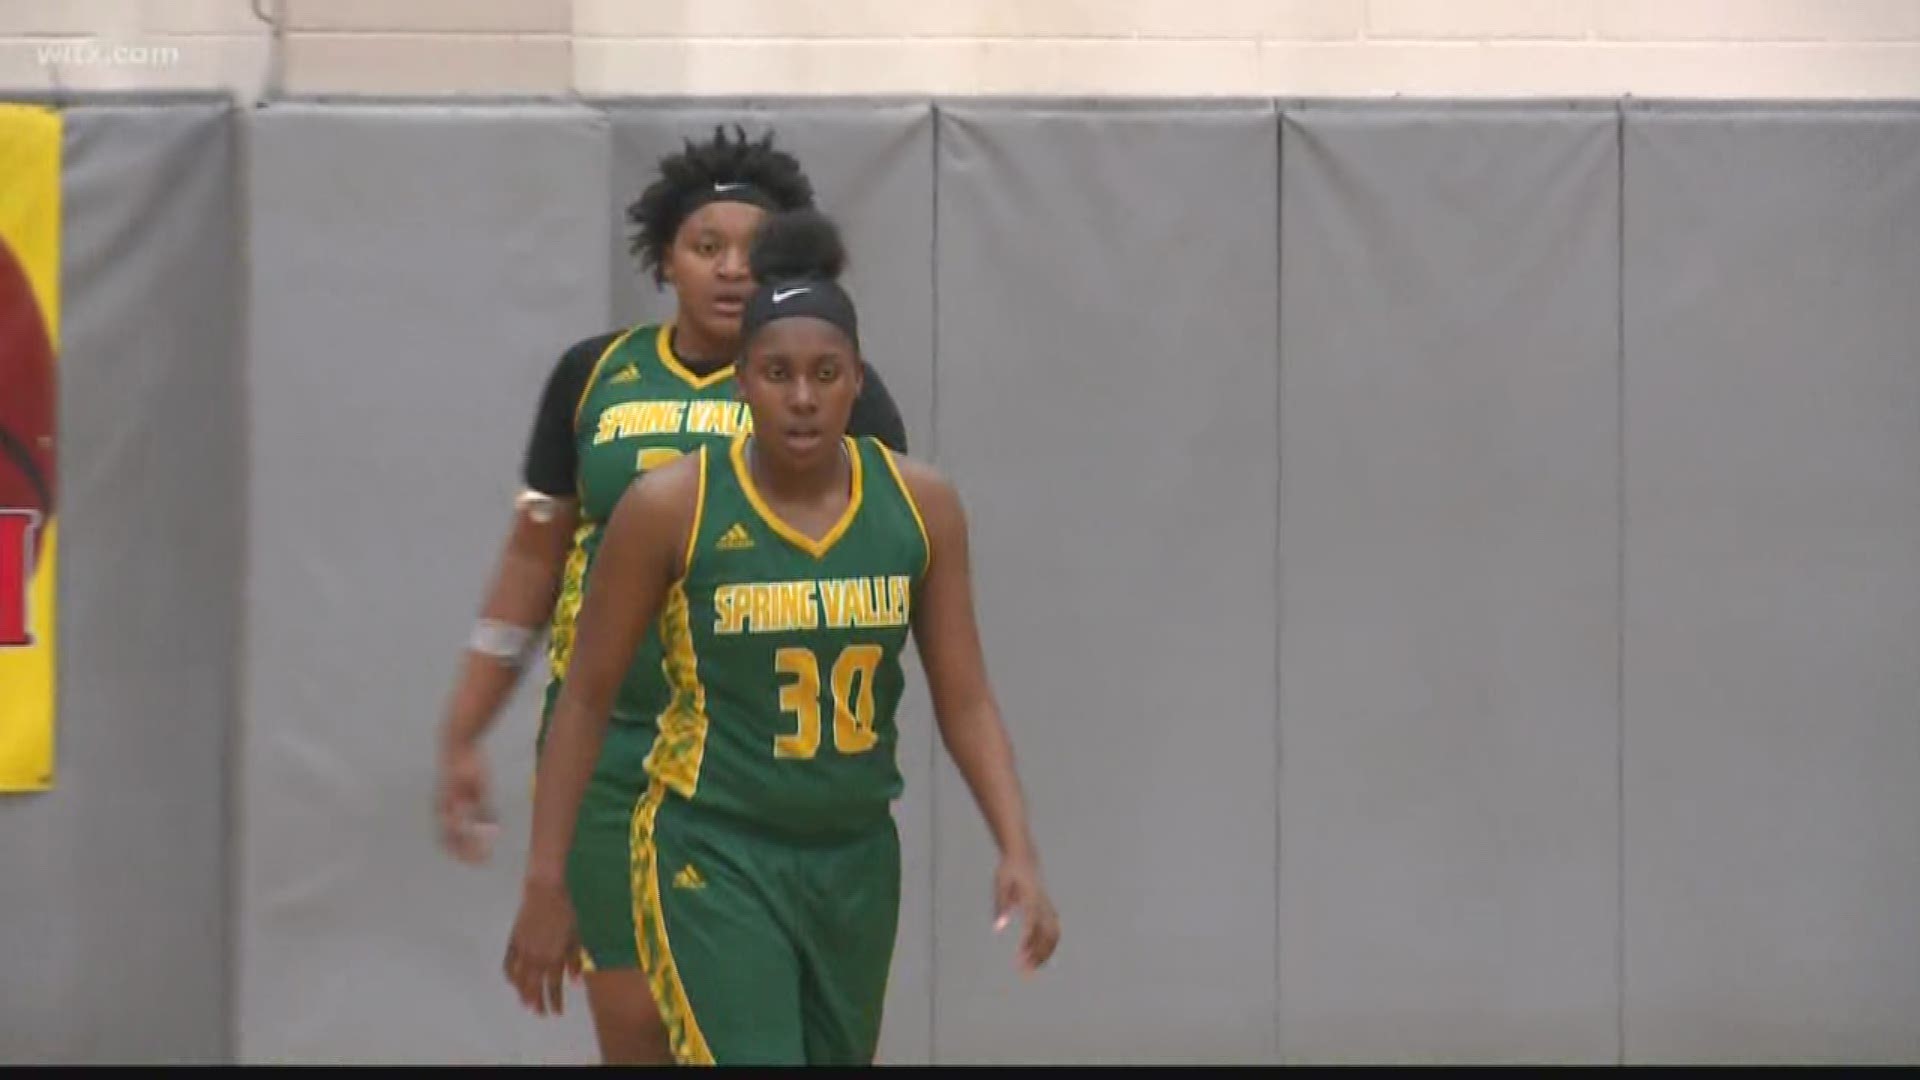 Spring Valley guard Ashley Williamson has signed with William & Mary.